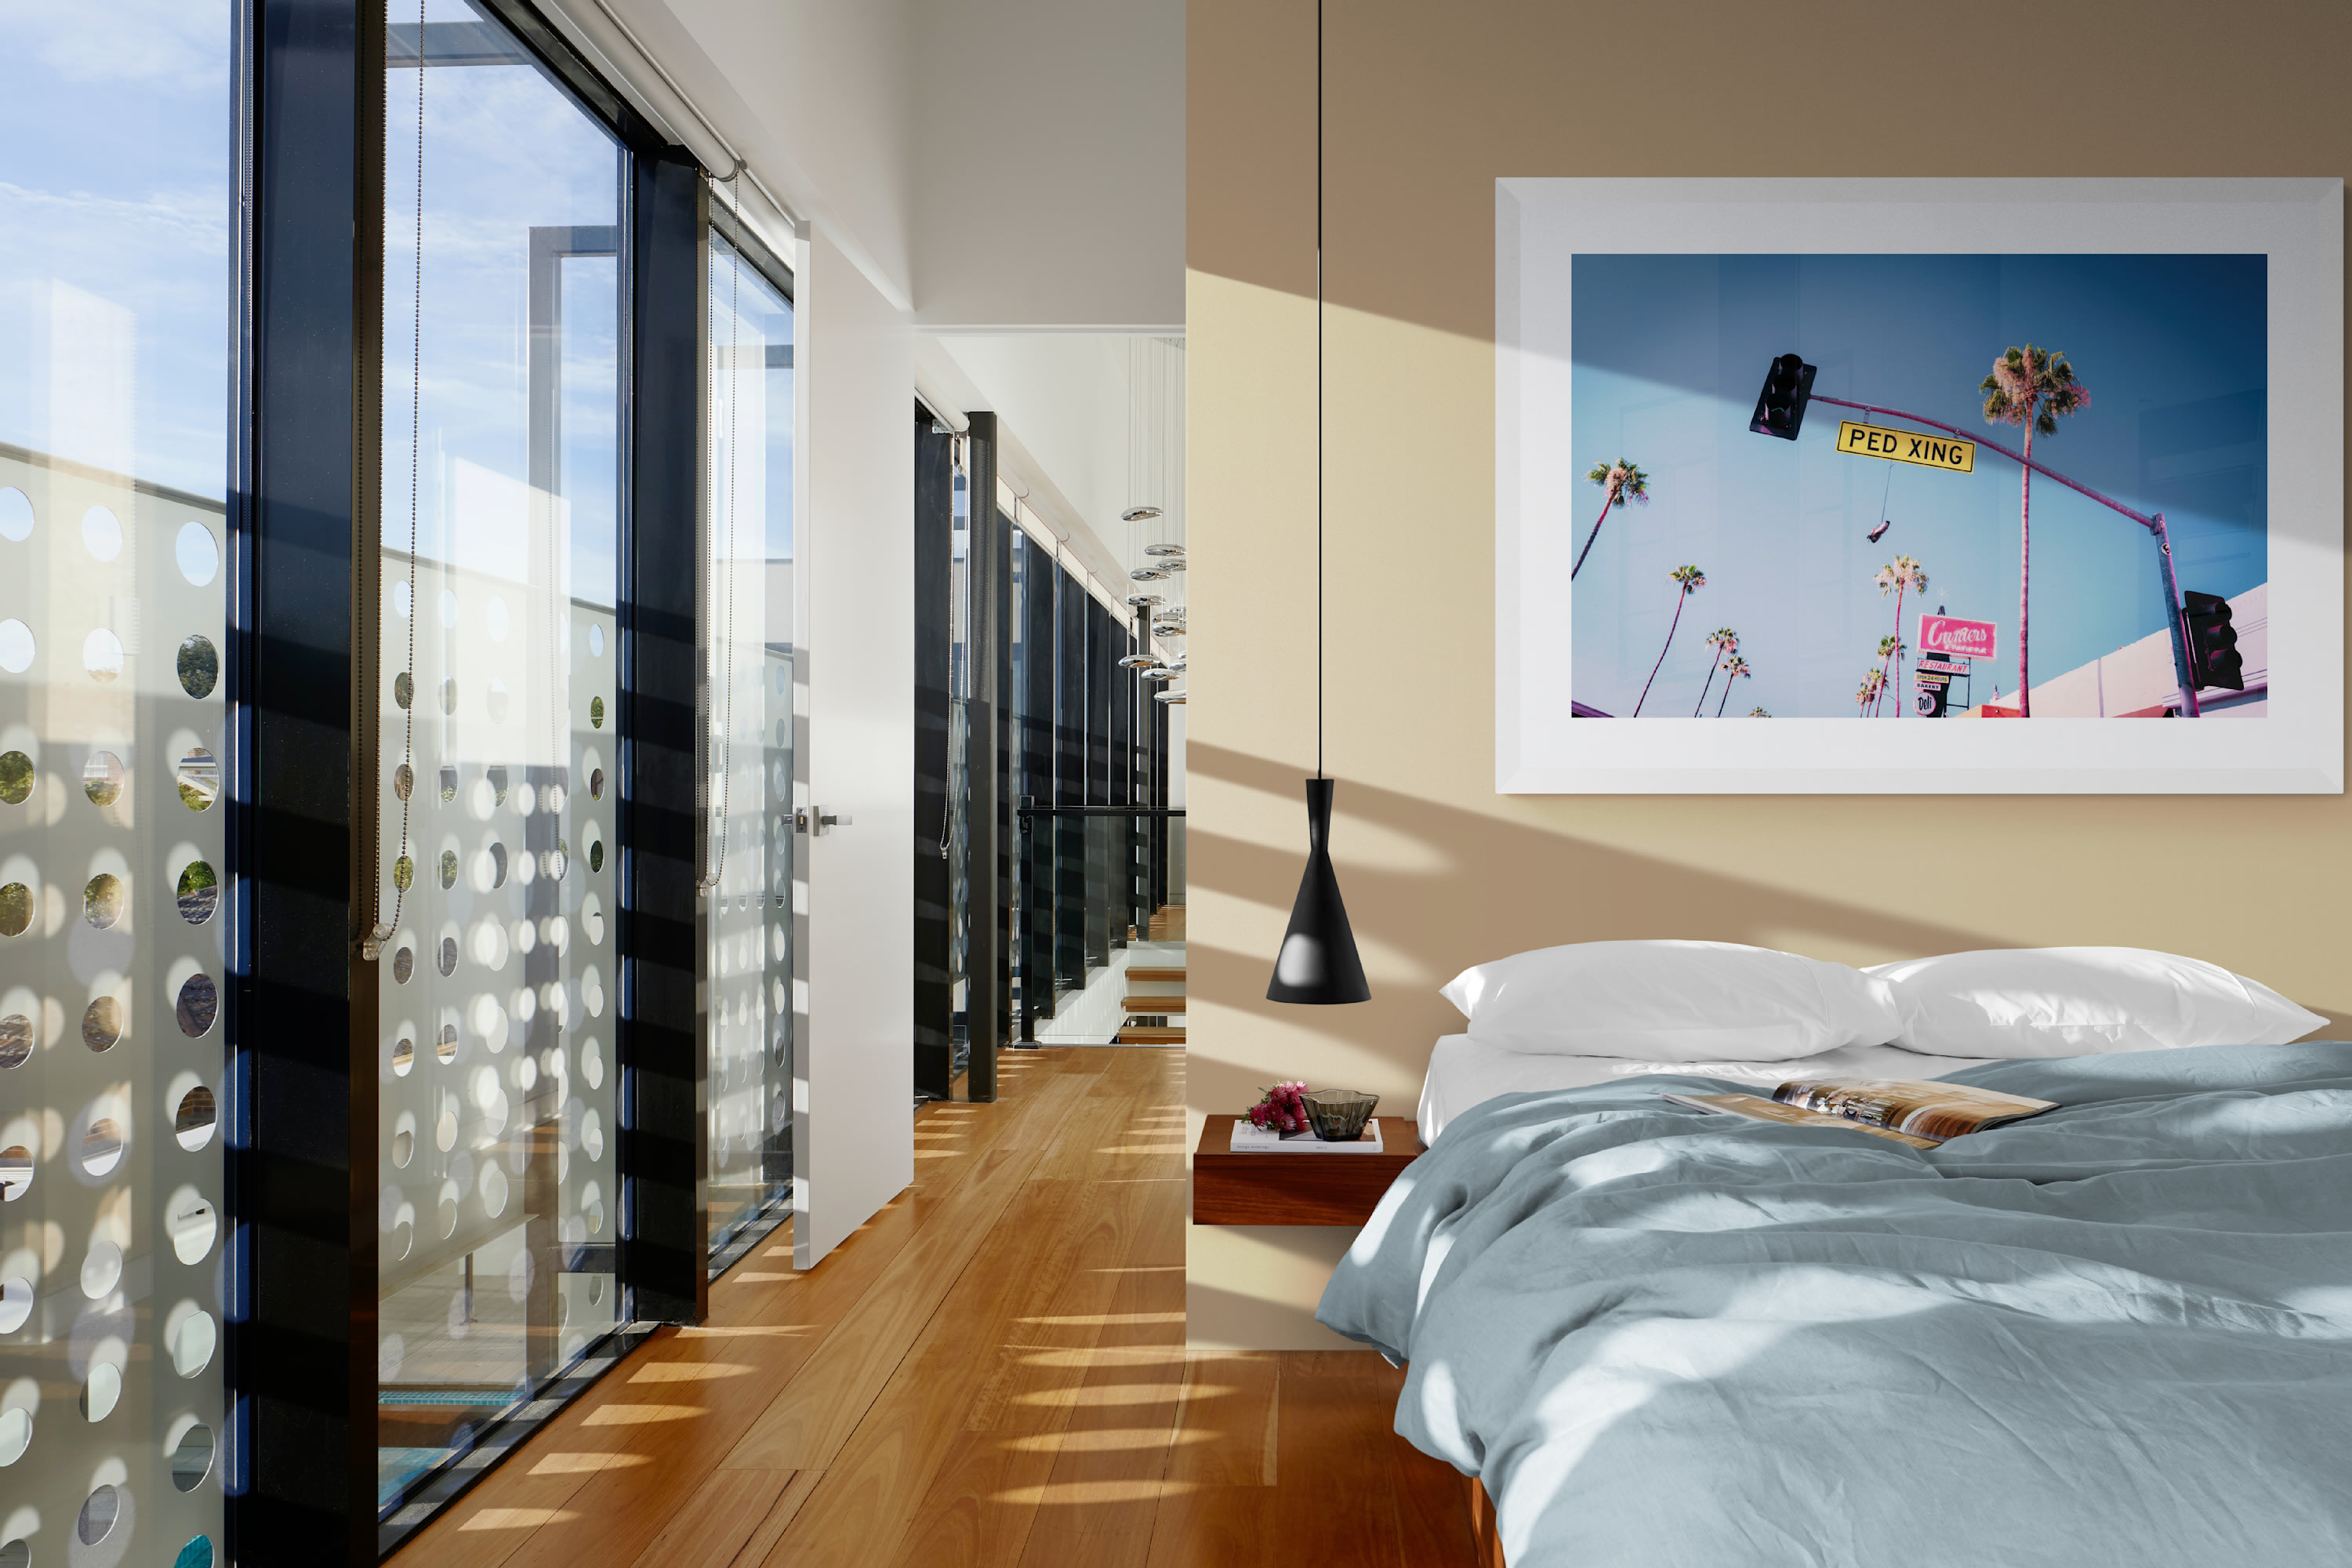 
        <div class='title'>
          Stylish apartment bedroom with large windows
        </div>
       